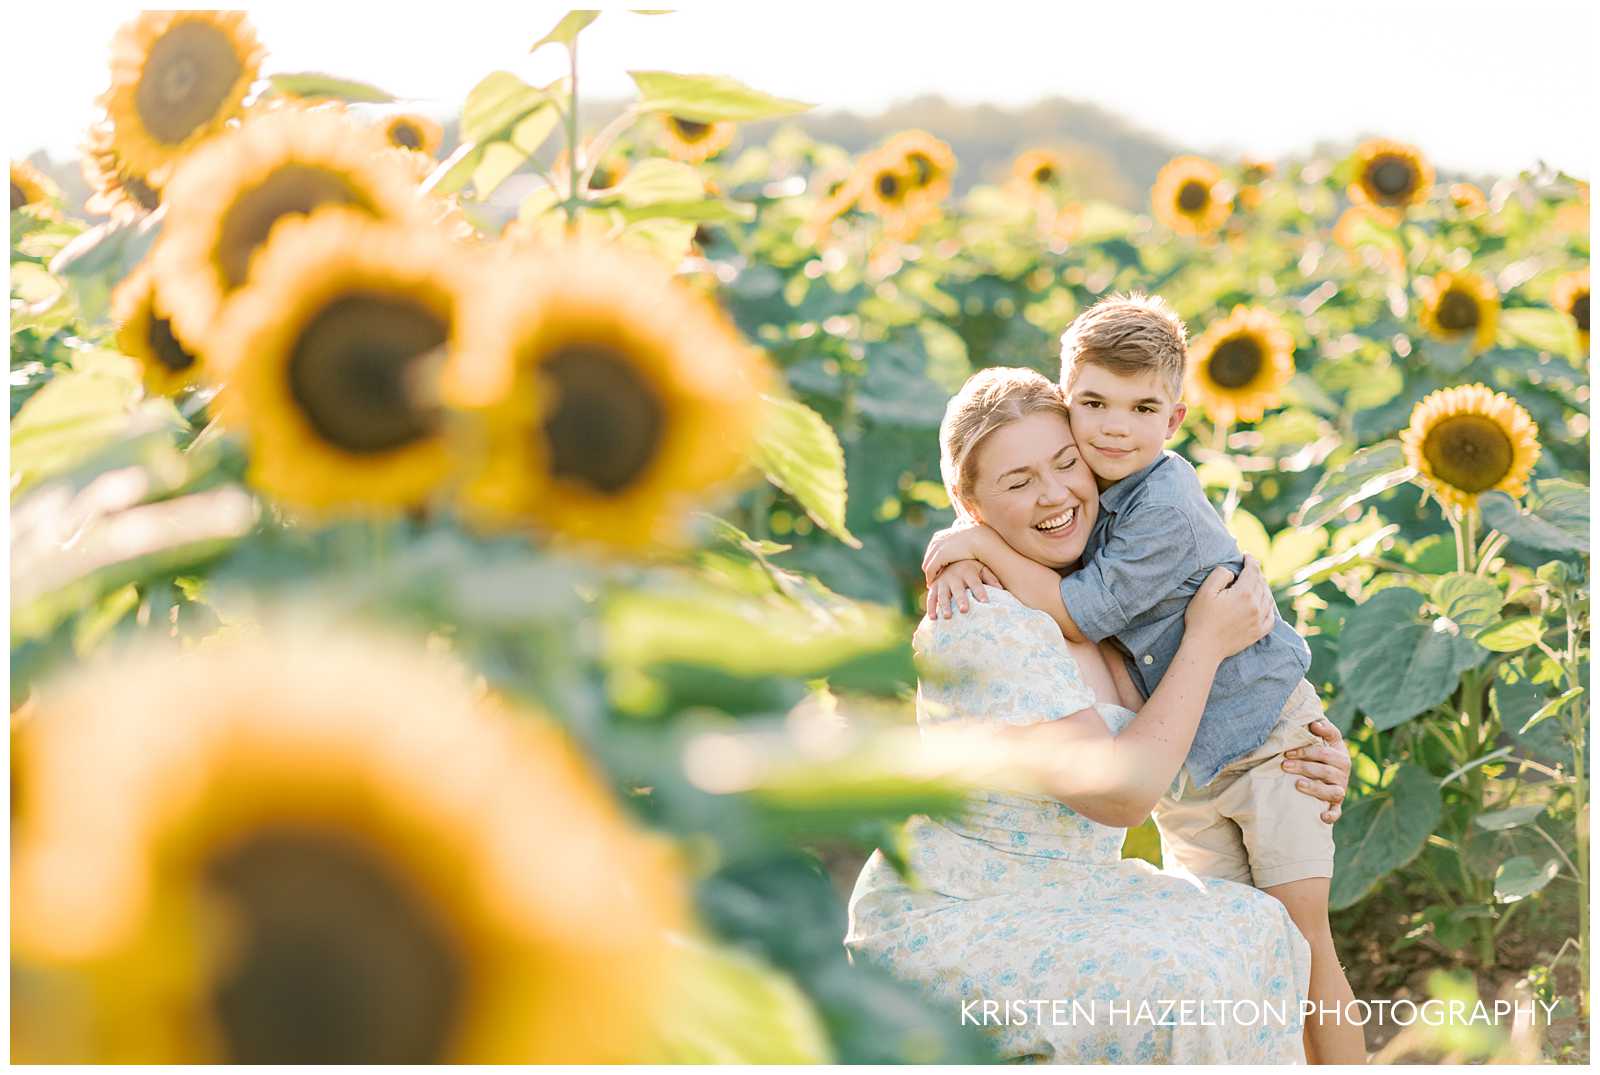 mother wearing a white dress with small blue flowers and son wearing a blue button up shirt and khaki shorts for their sunflower field outfits